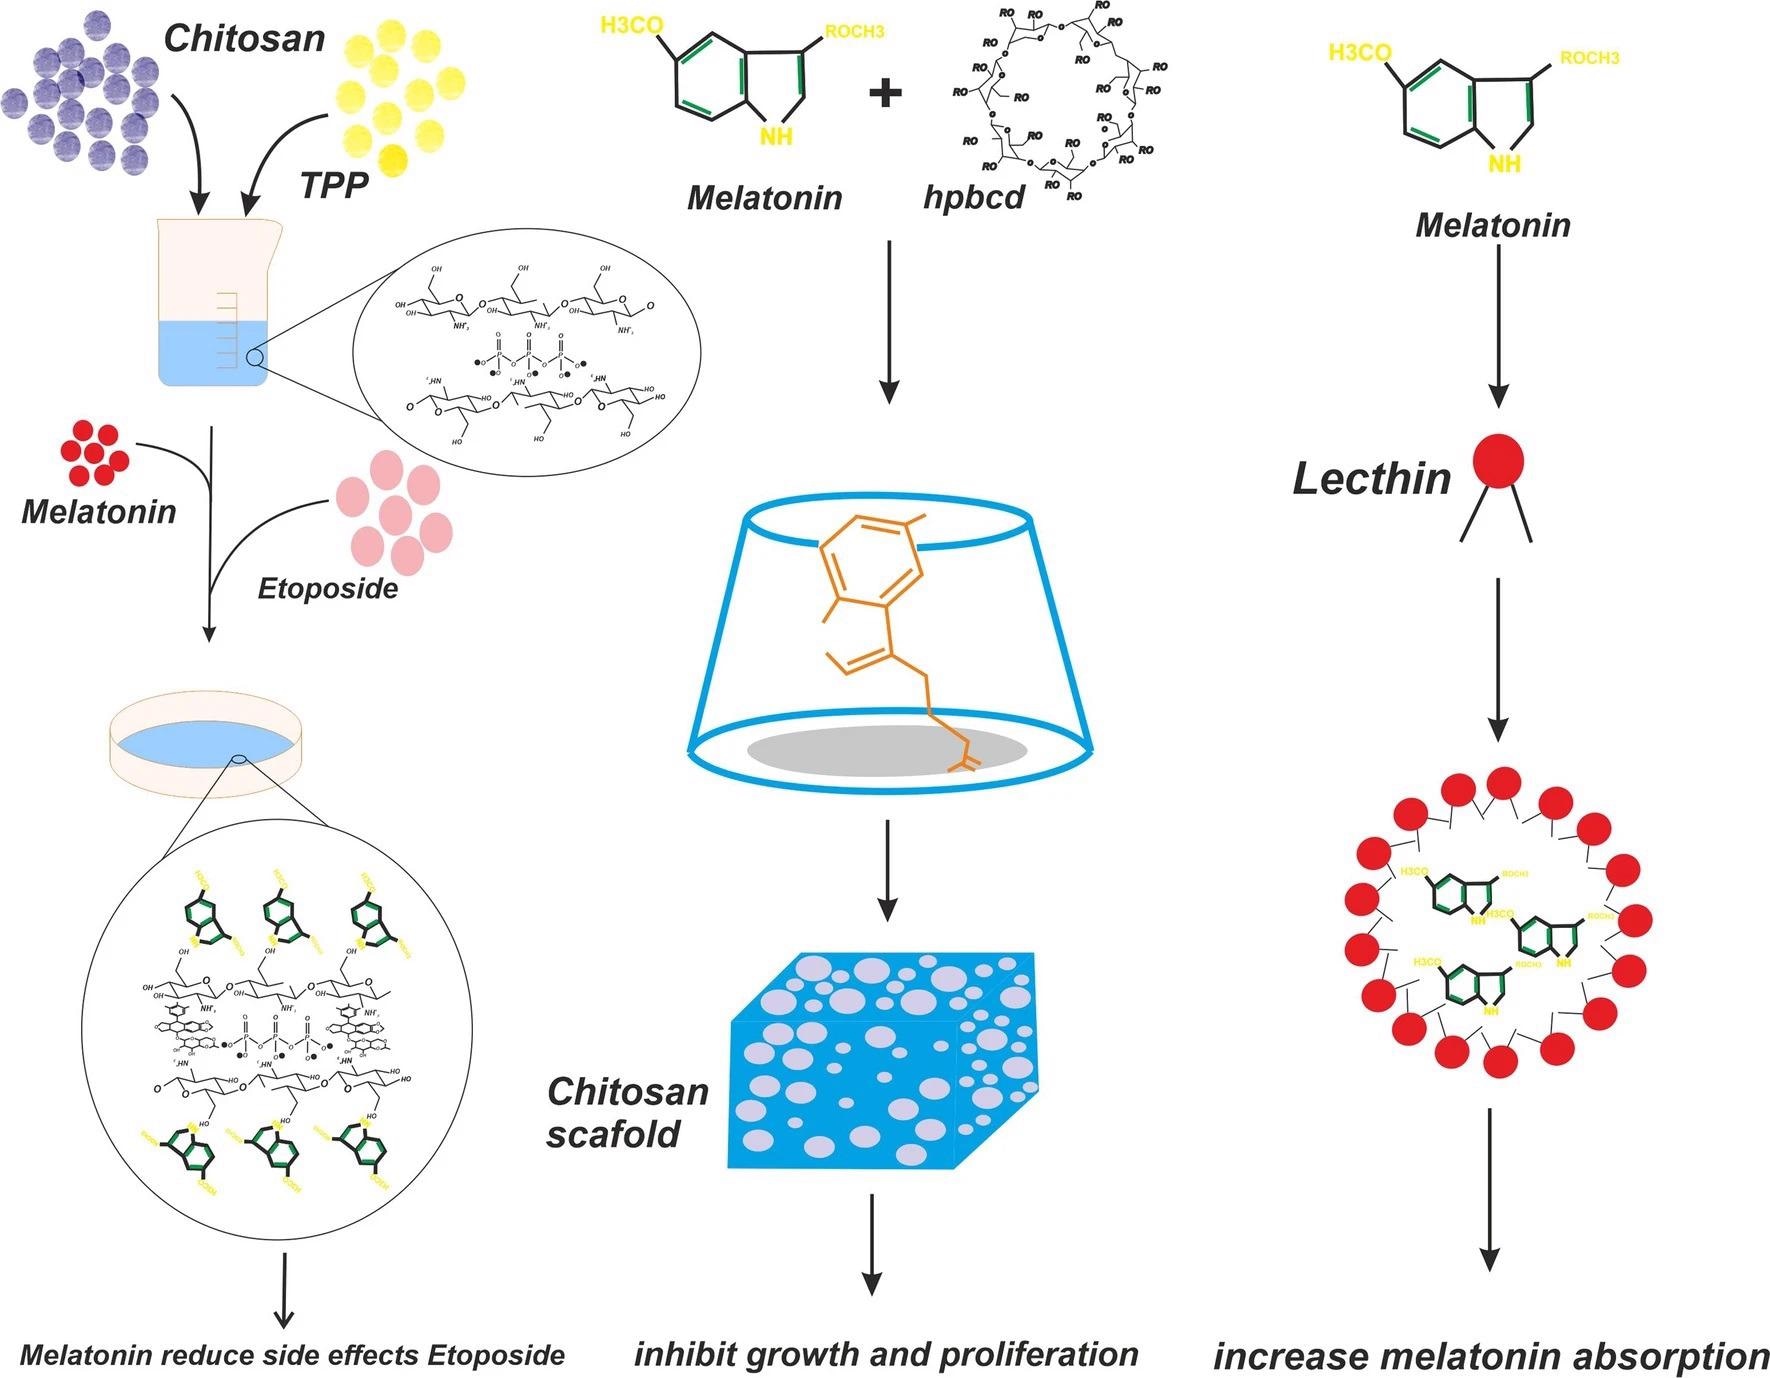 The schematic diagram provided reveals melatonin chitosan nanostructures and its functions